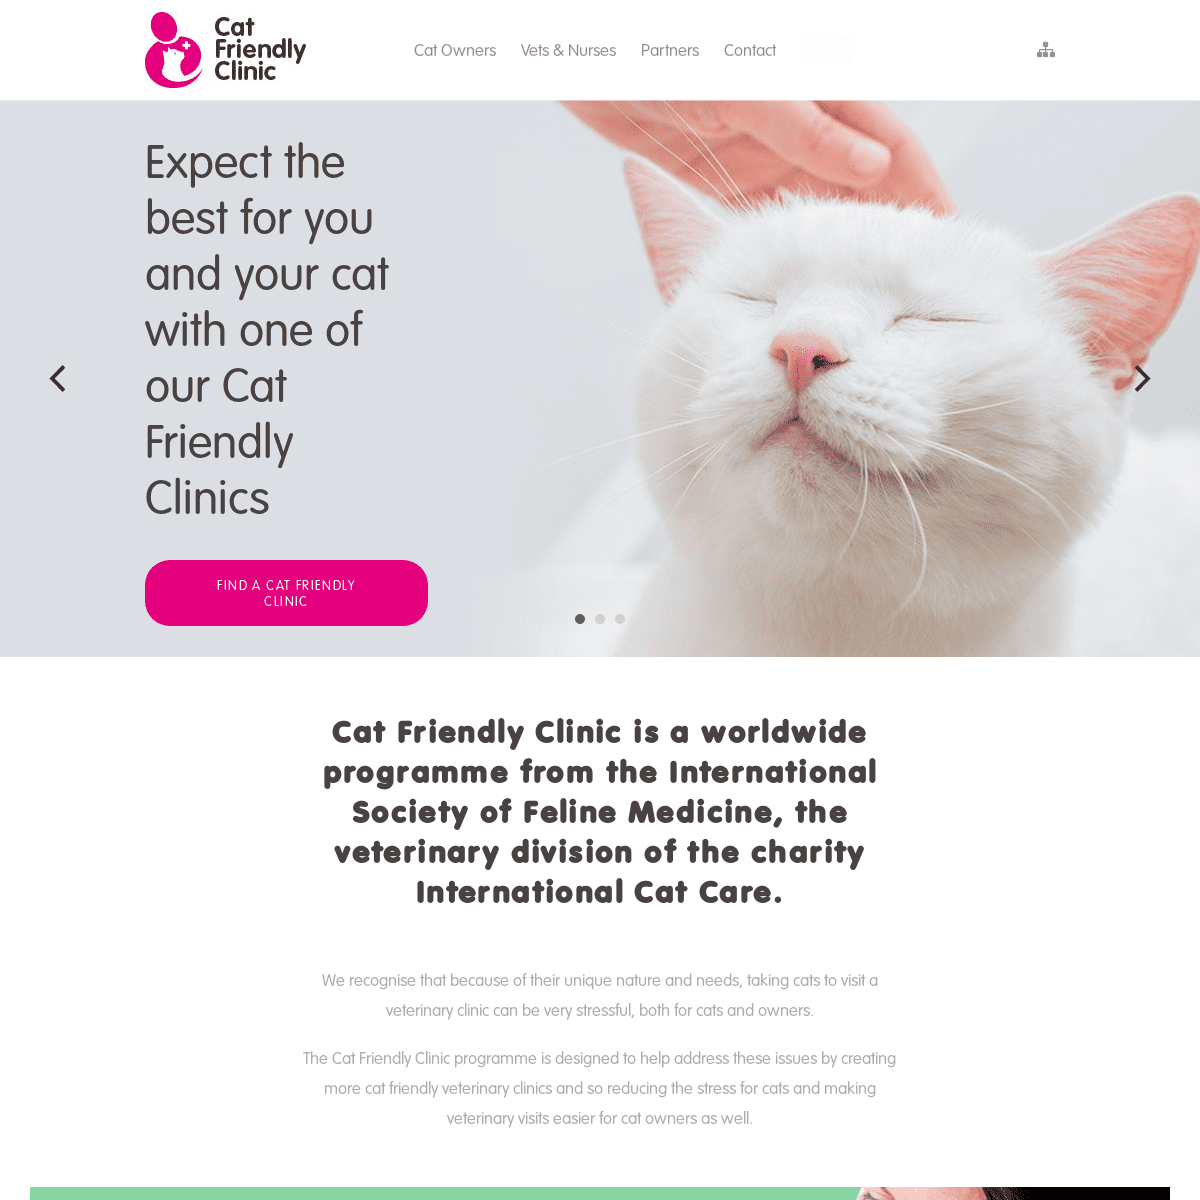 A complete backup of https://catfriendlyclinic.org